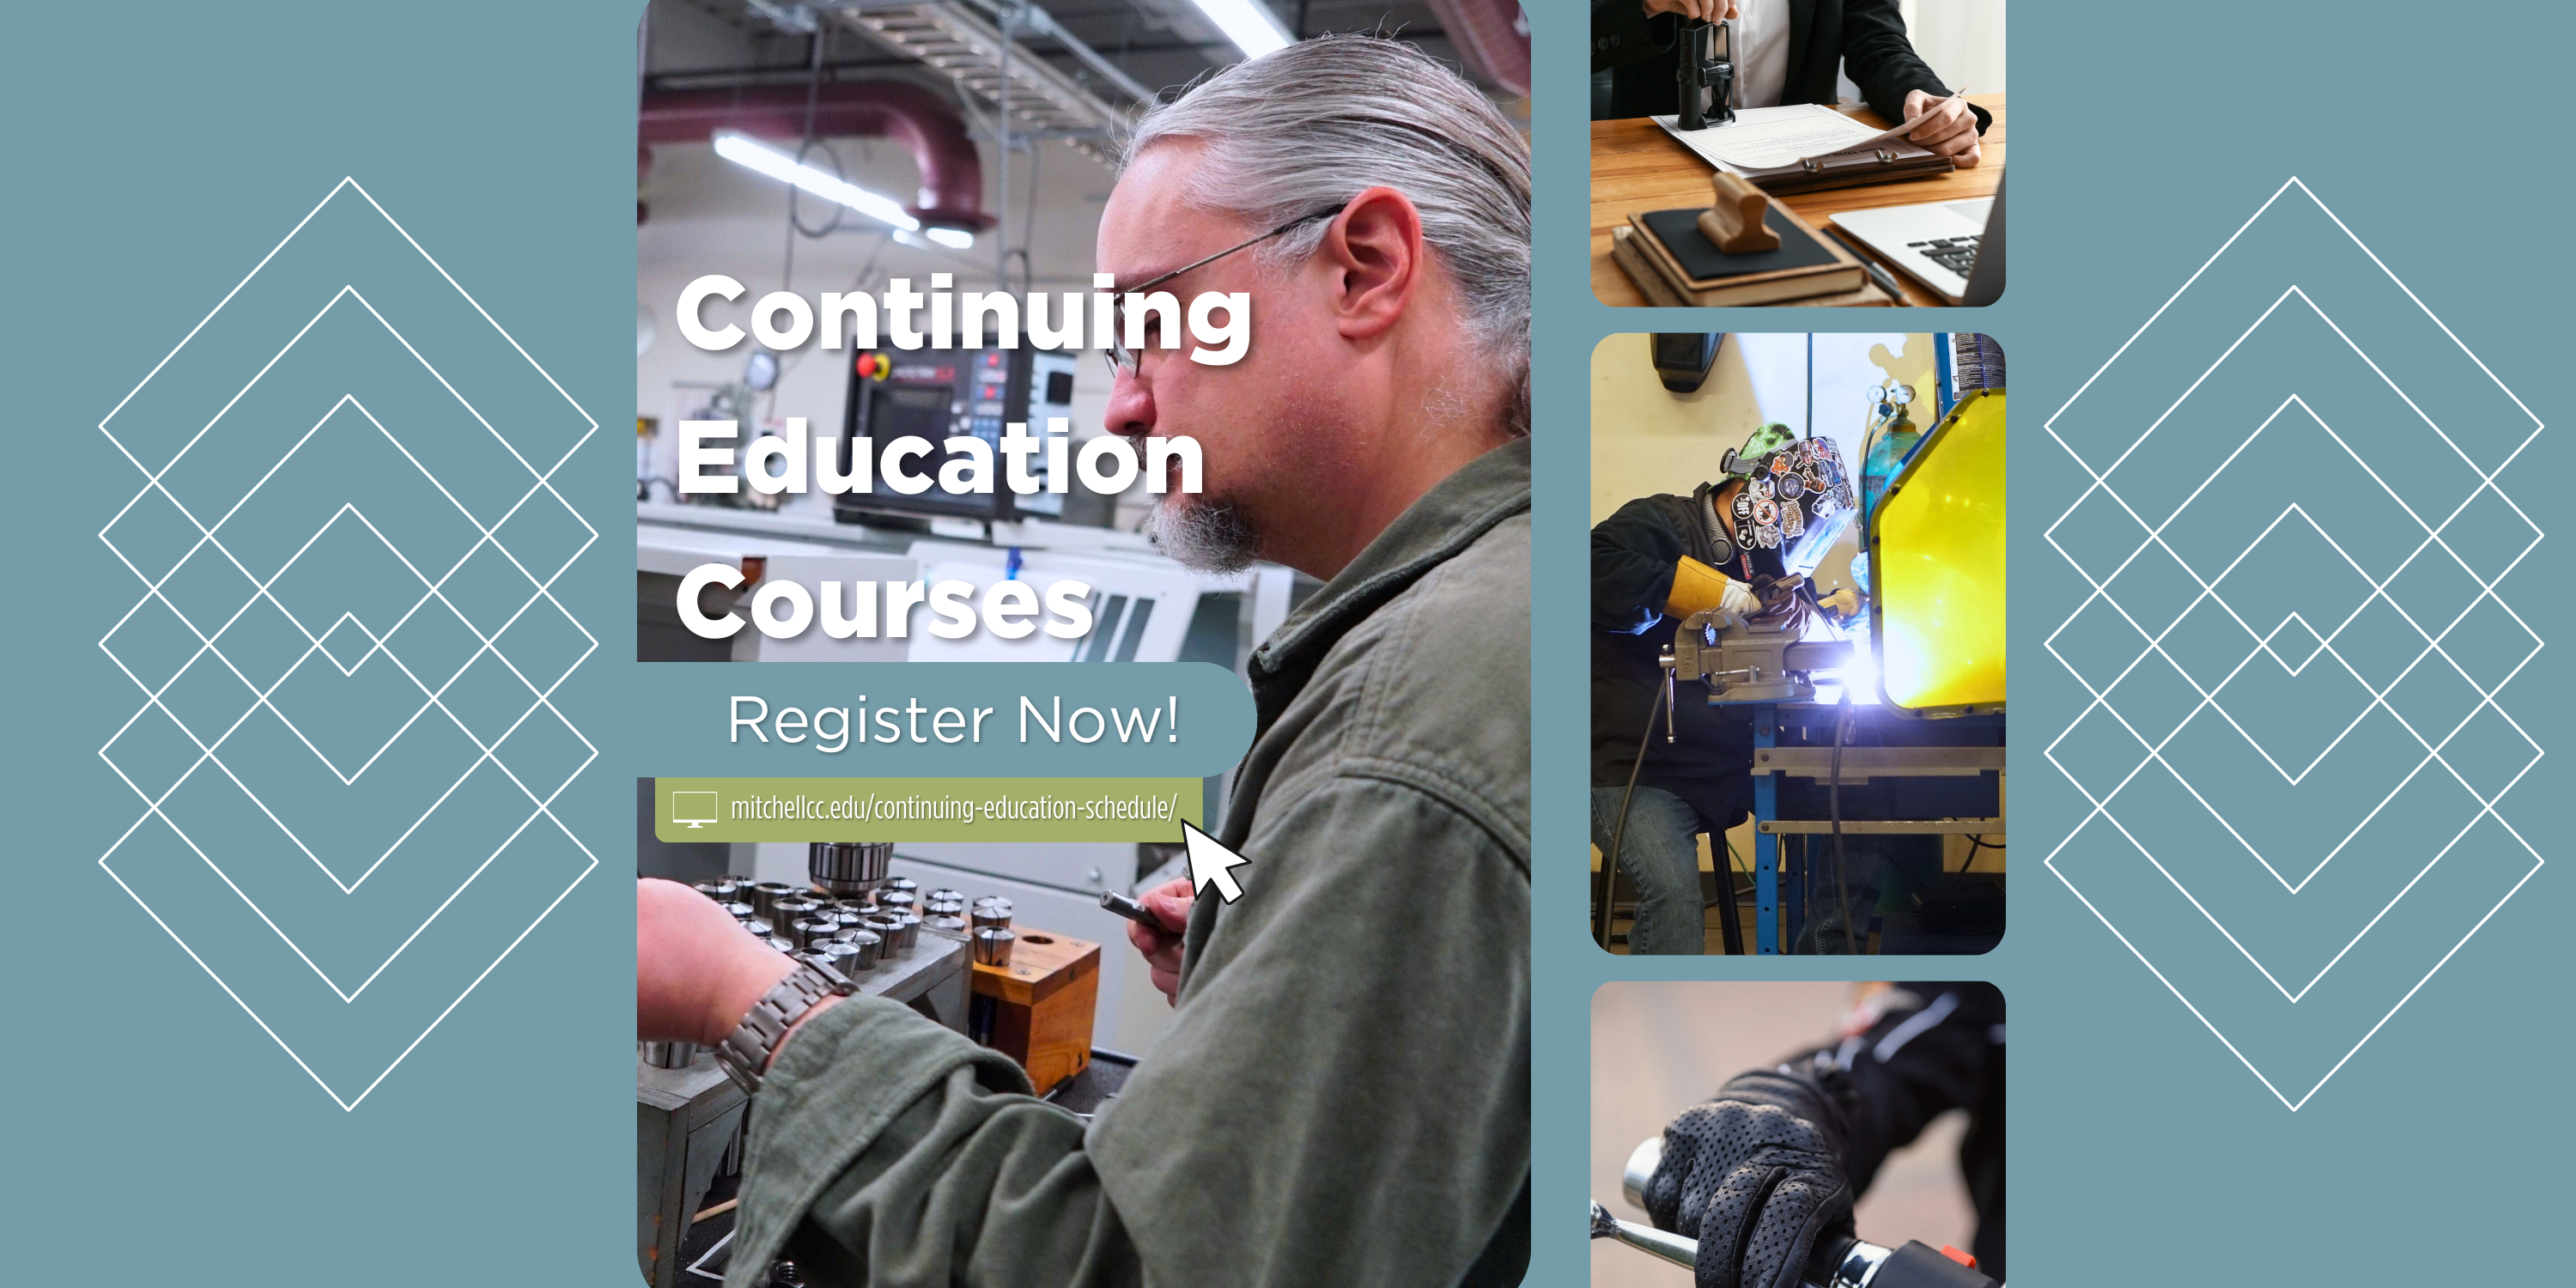 Banner that reads "Continuing Education Schedule Release". Click the banner to view the Continuing Education Schedule.